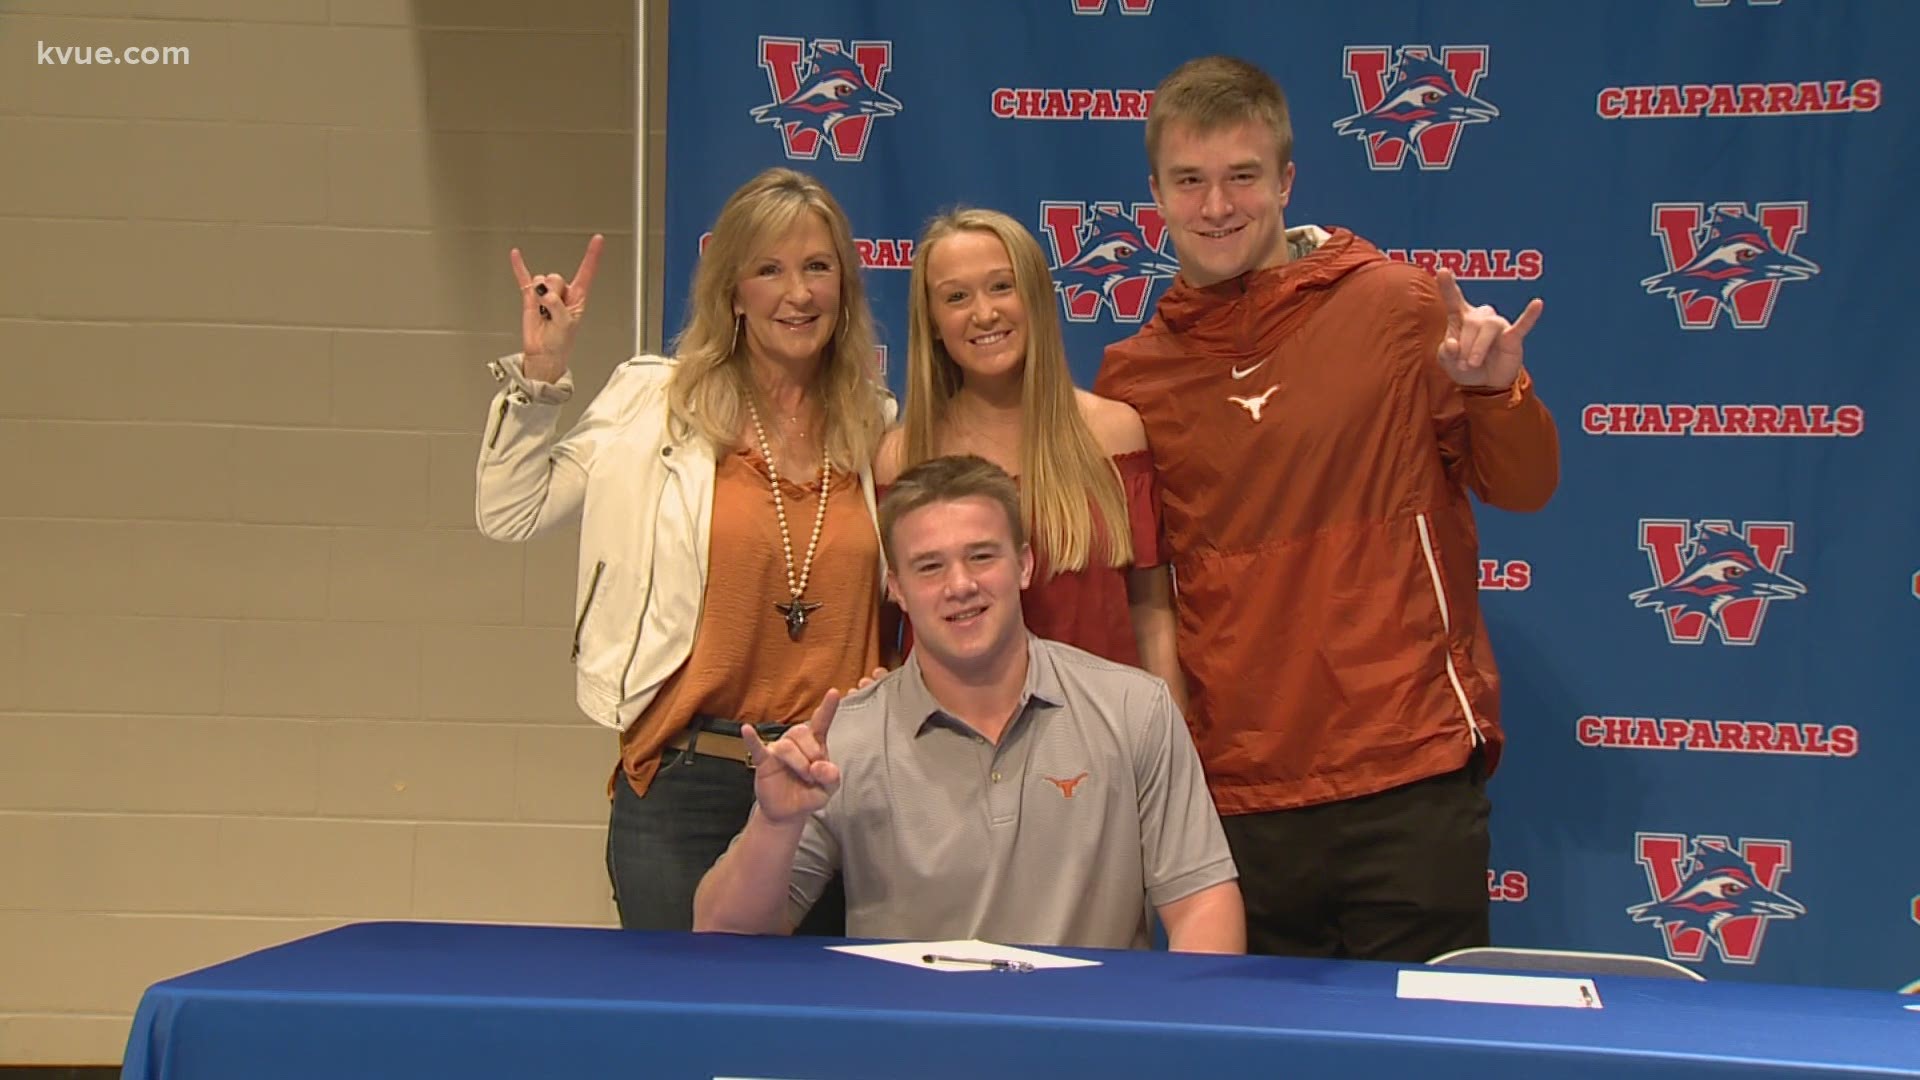 Tributes came in from family, friends and teammates after the death of Texas linebacker Jake Ehlinger. He was 20 years old.